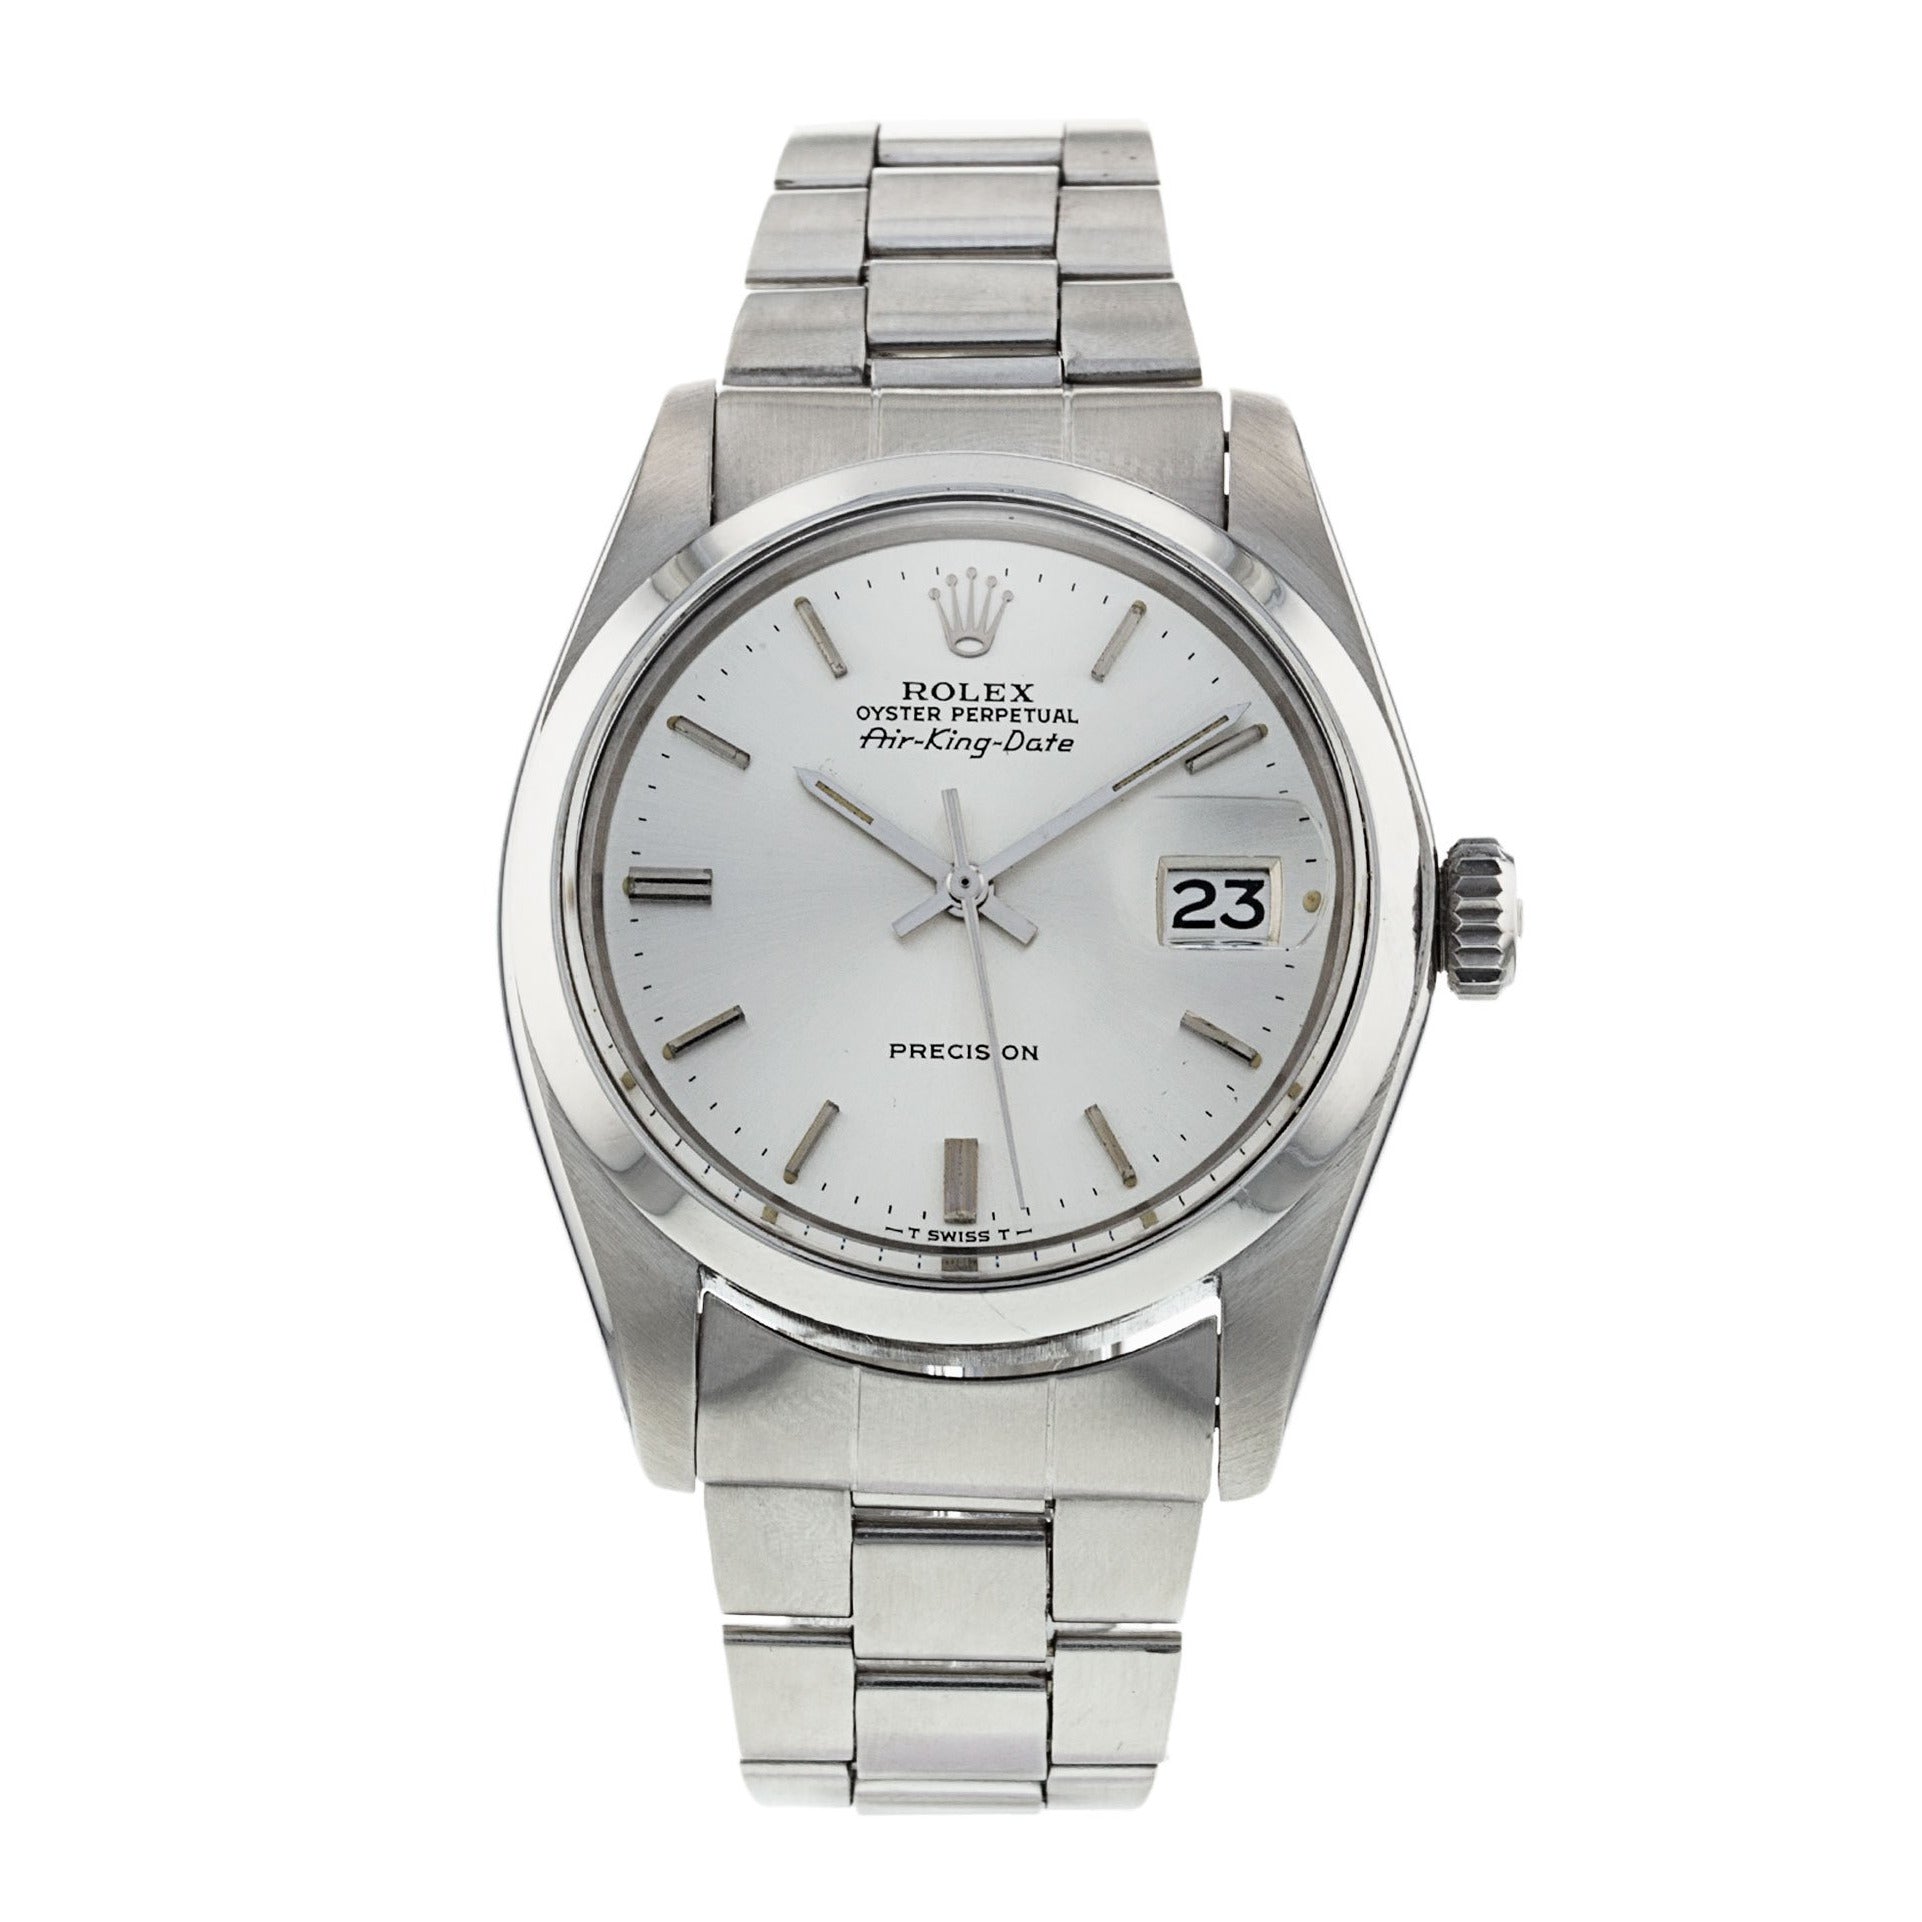 Flourish bassin revolution Rolex Air-King Date (Pre-Owned) – Royal Watch